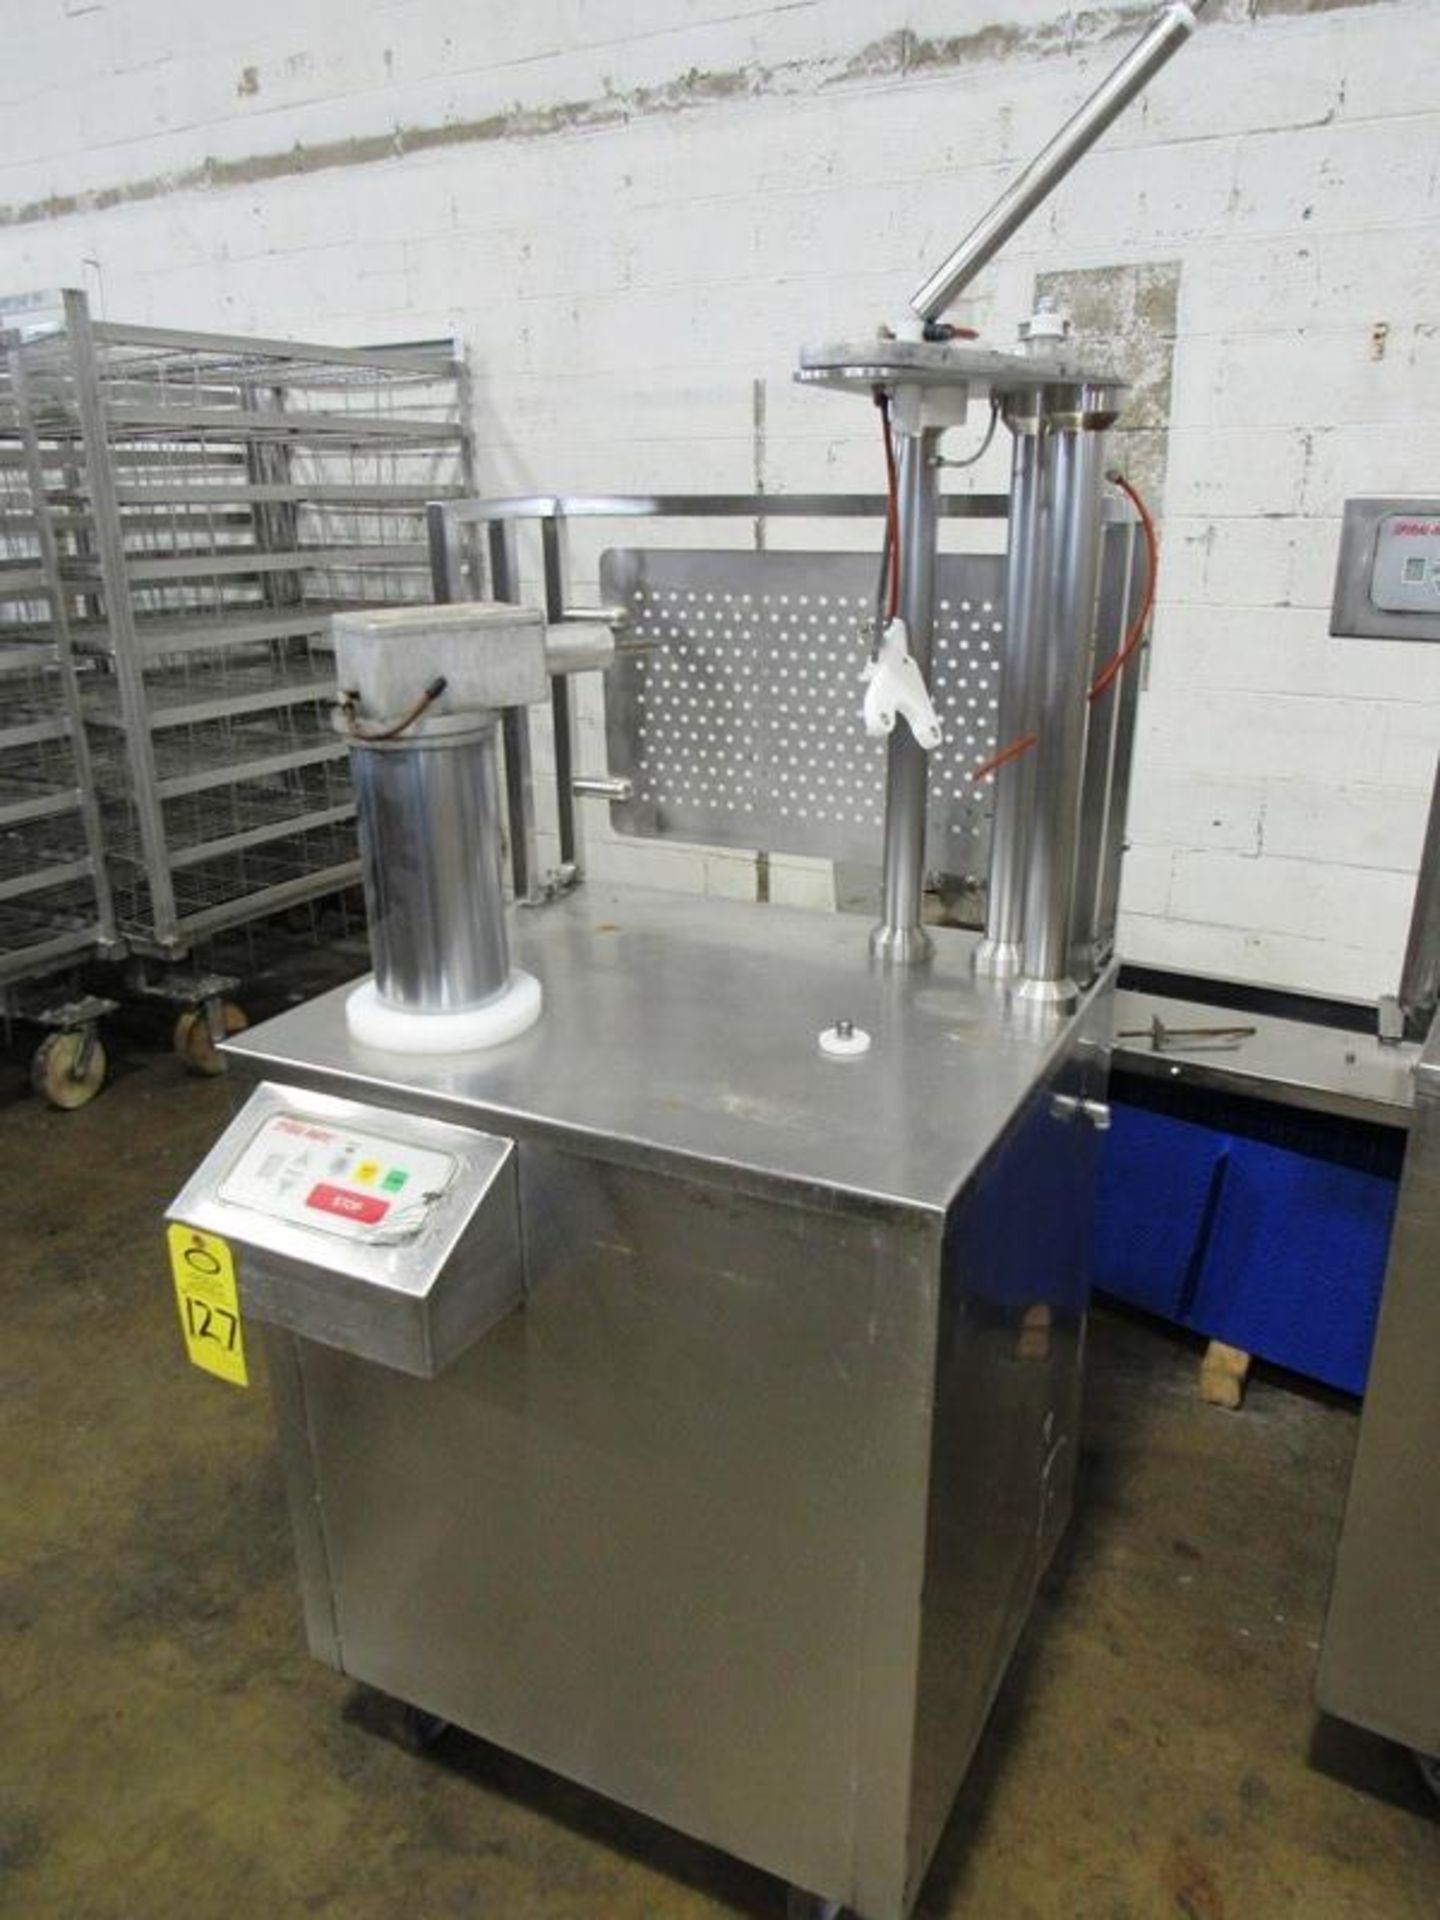 Spiral-Matic Mdl. A65 Spiral Ham Slicer, no blade, missing parts, 489708 cycles indicated, Located